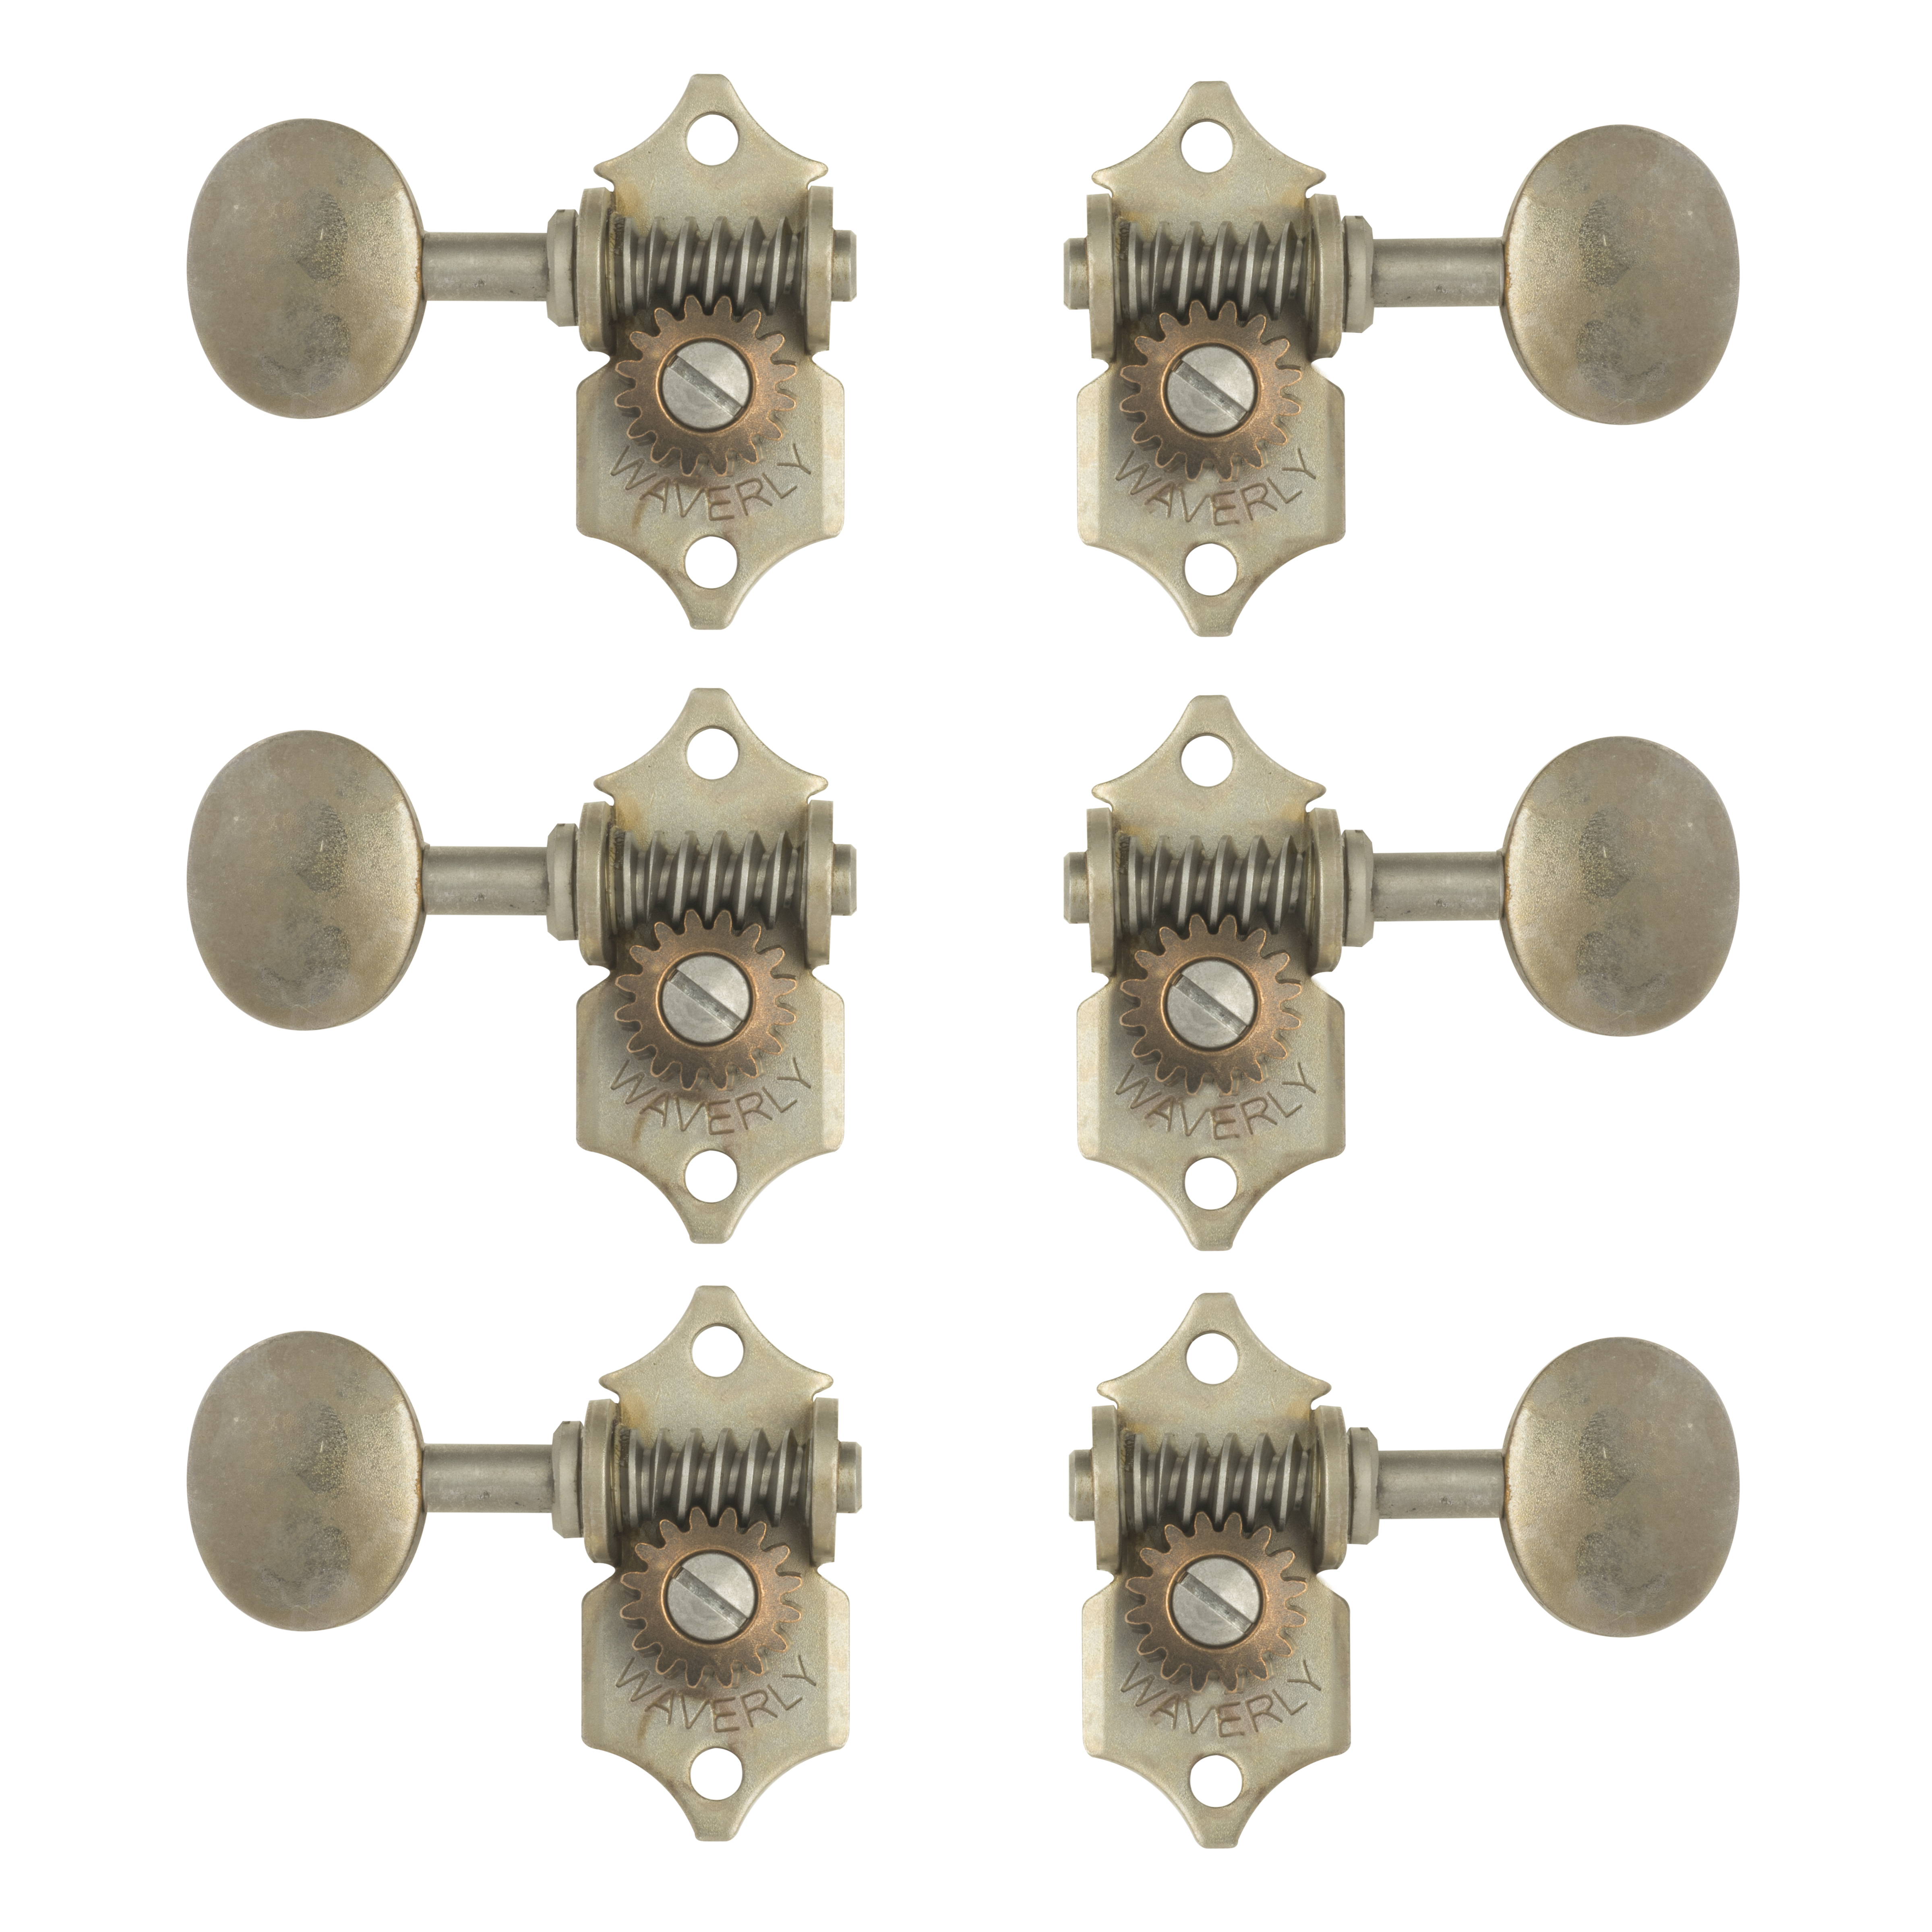 Waverly Guitar Tuners with Vintage Oval Knobs for Slotted Pegheads